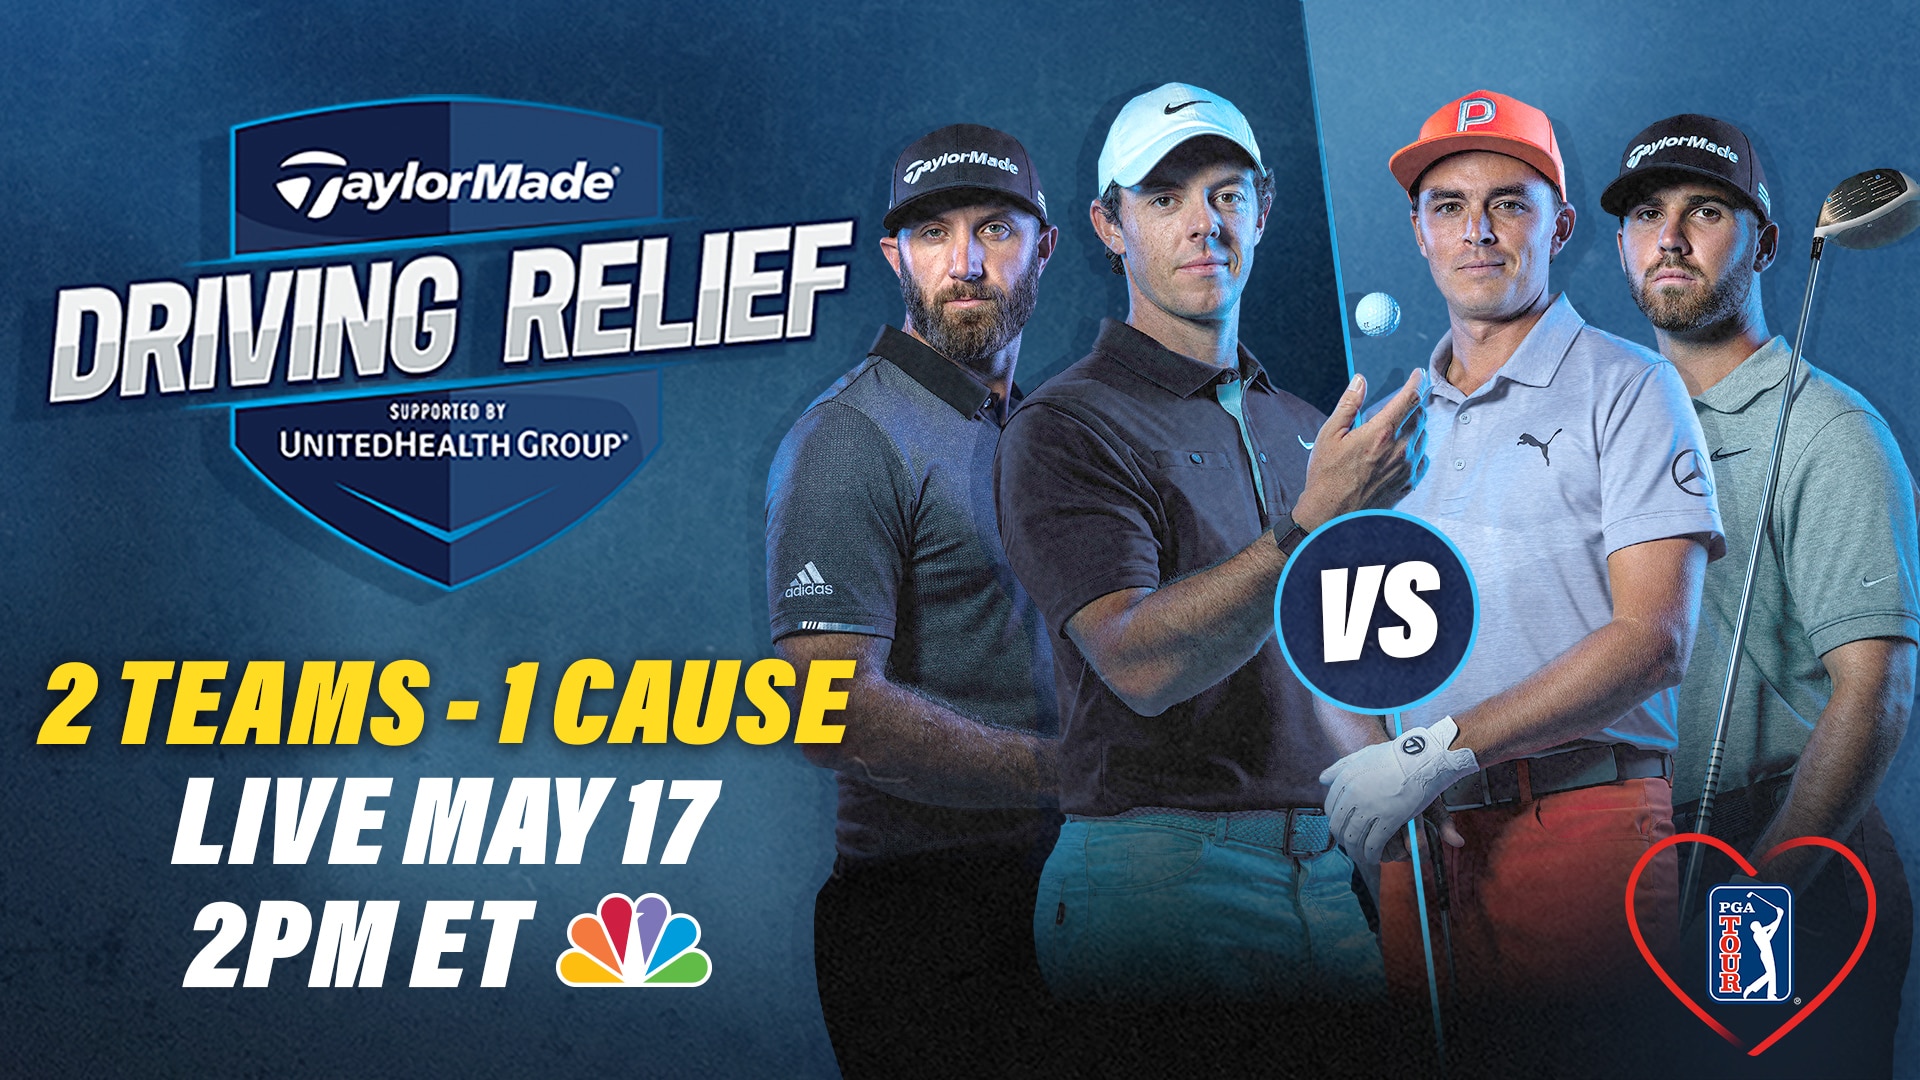 TaylorMade Driving Relief charity match may include pool noodle in cups